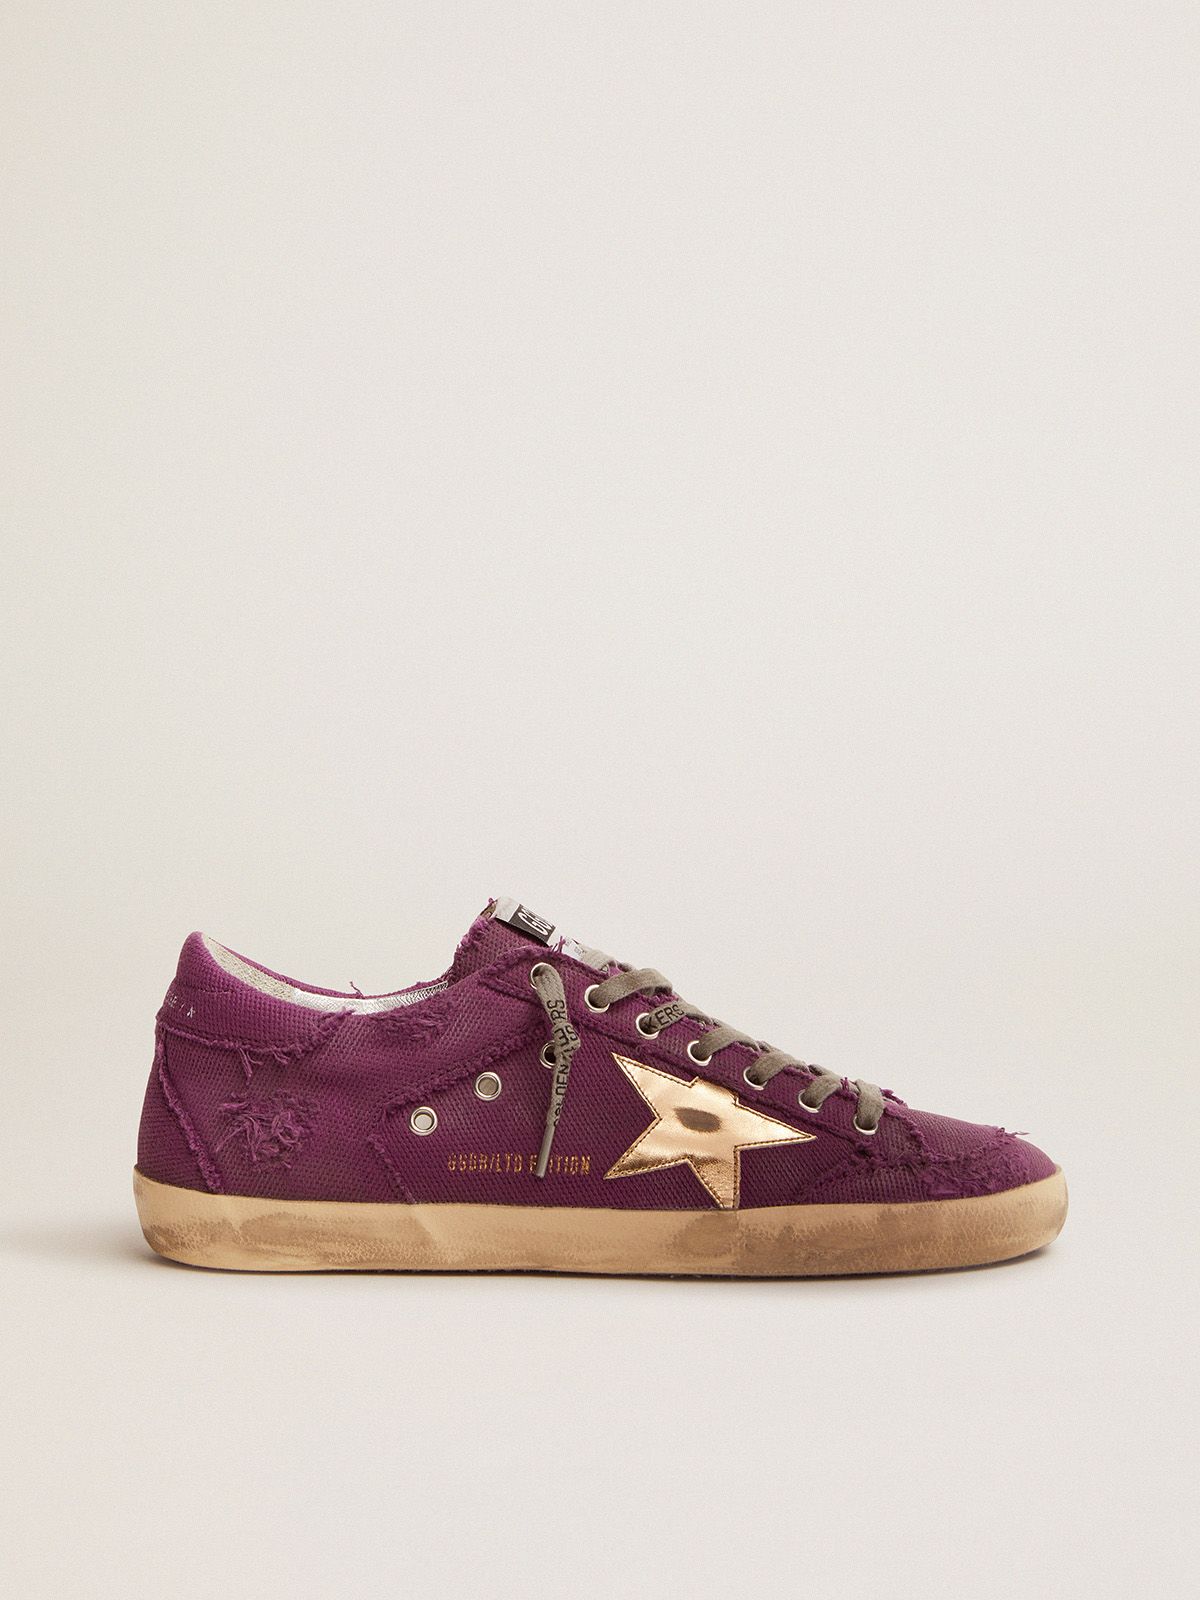 Super-Star Penstar LAB sneakers in purple distressed canvas with gold laminated leather star